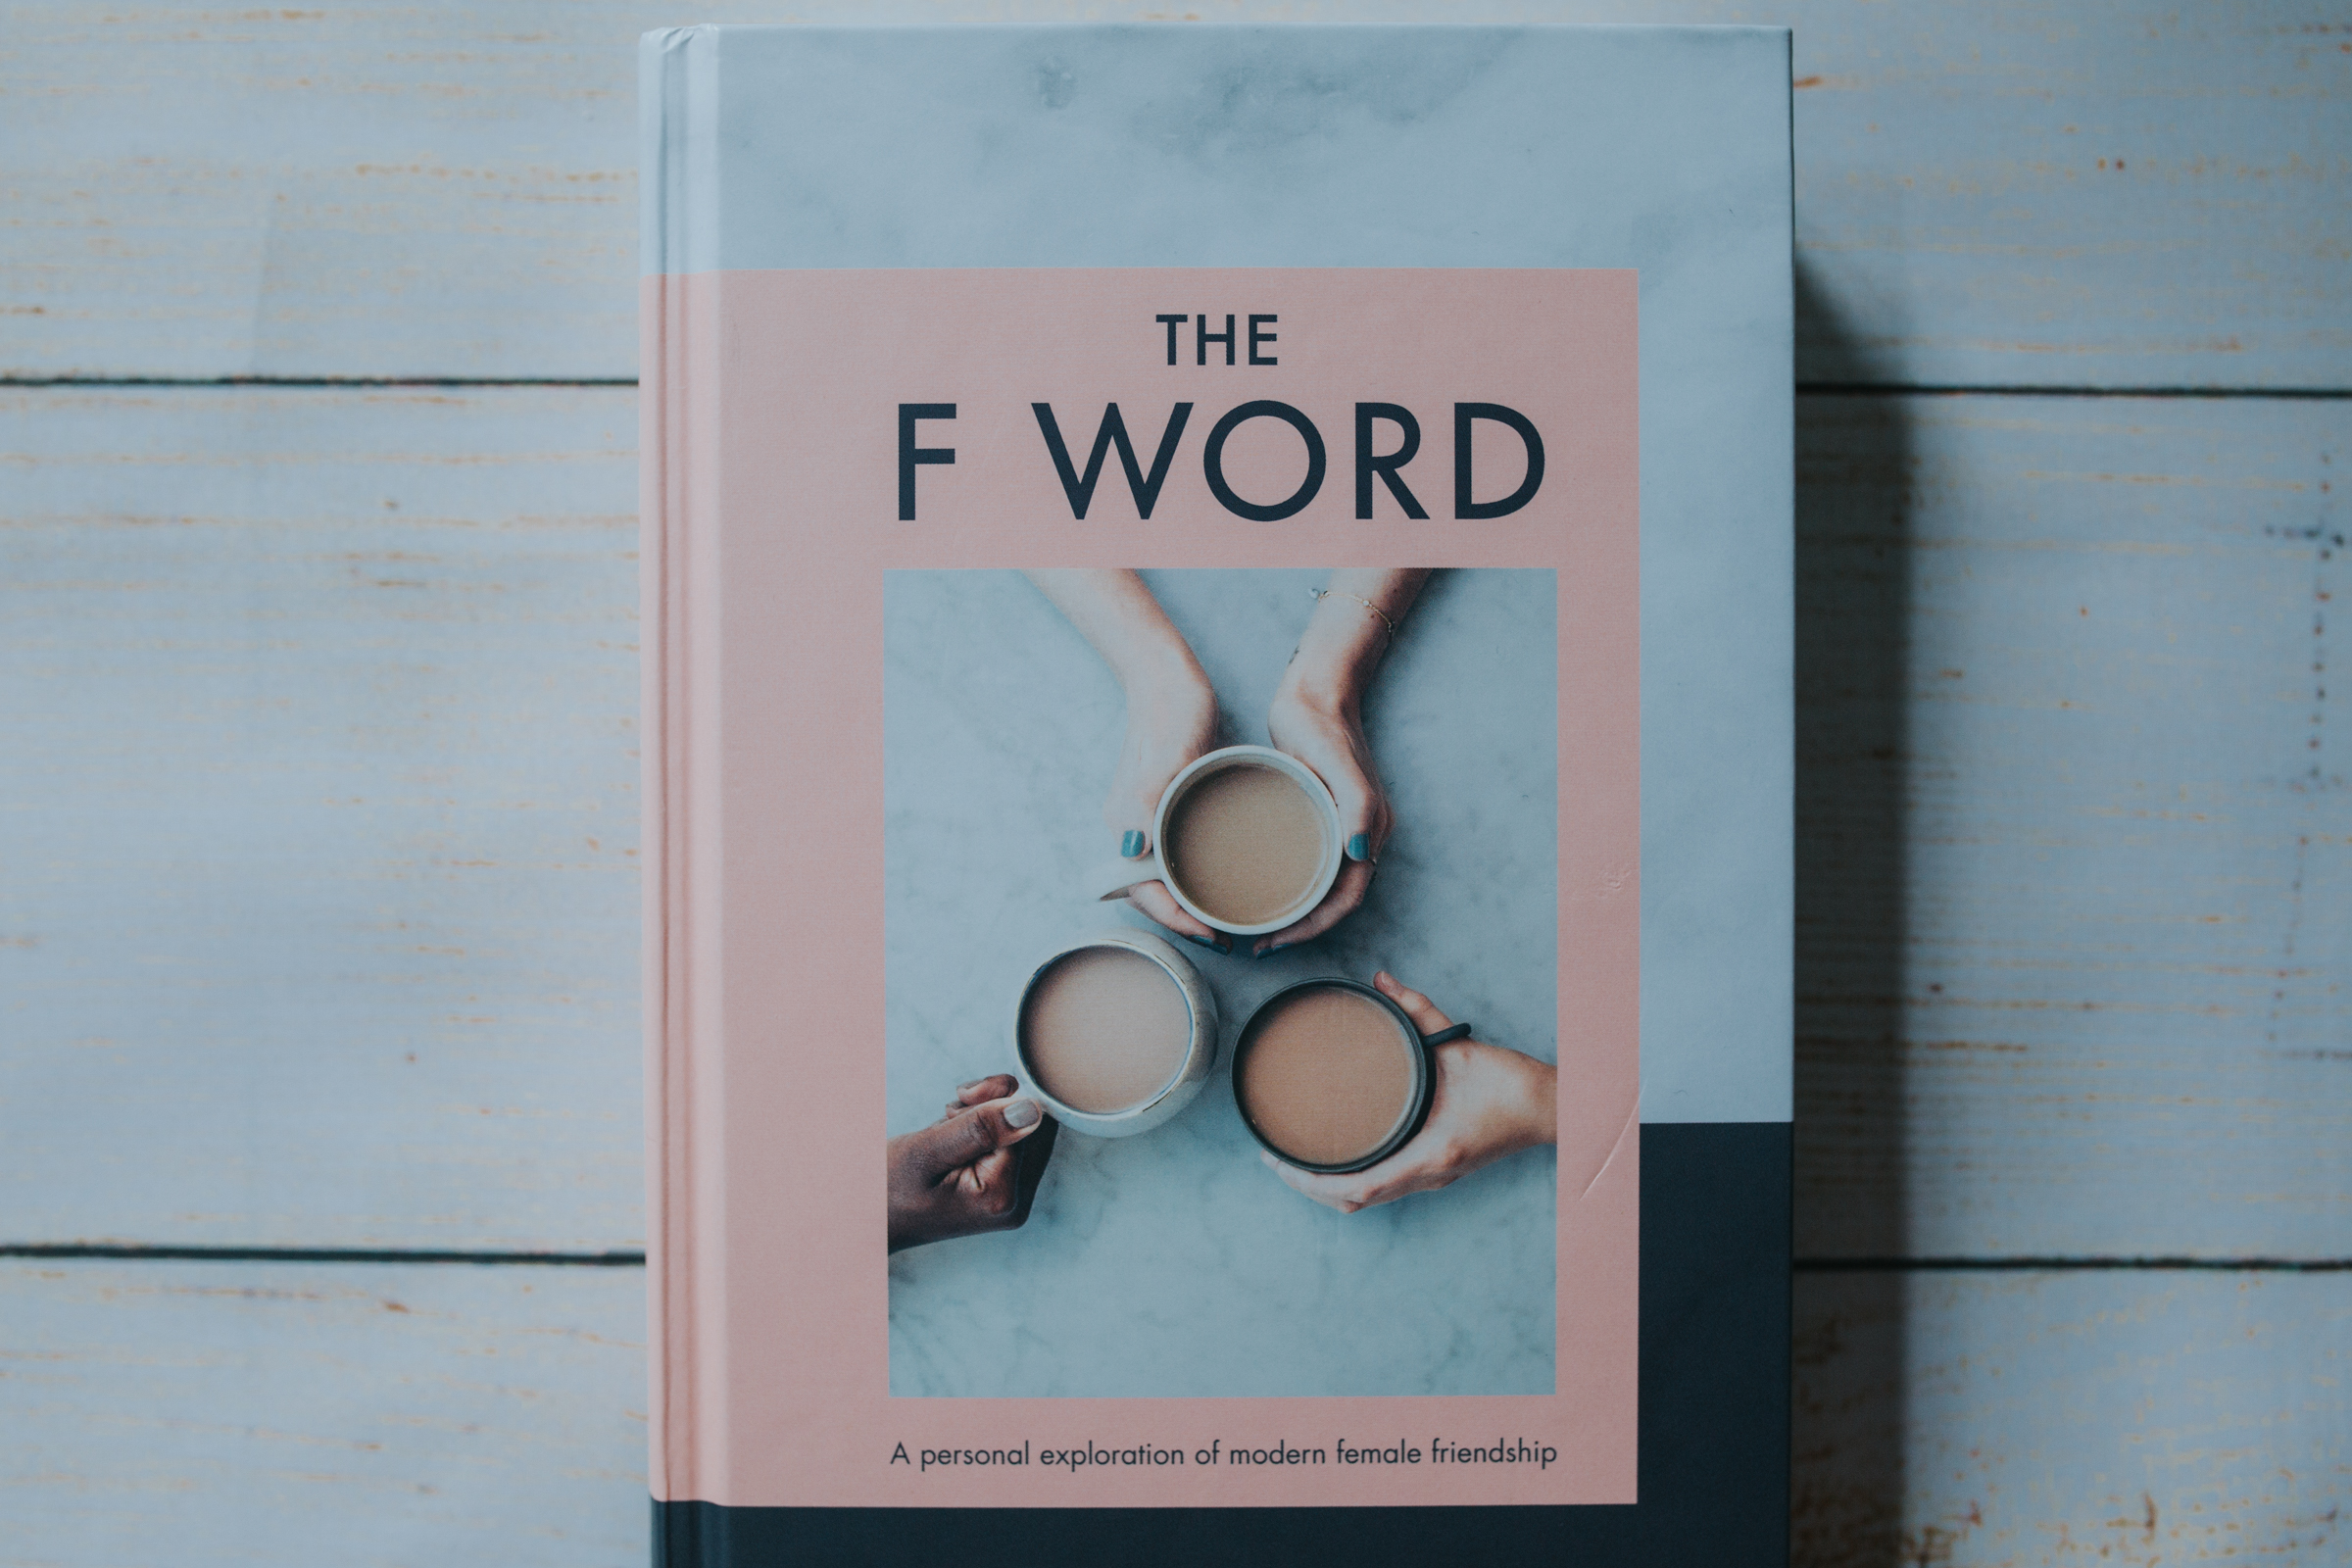 book-review-the-f-word-by-lily-pebbles-minas-planet-london-blogger-jasmina-haskovic2.jpg